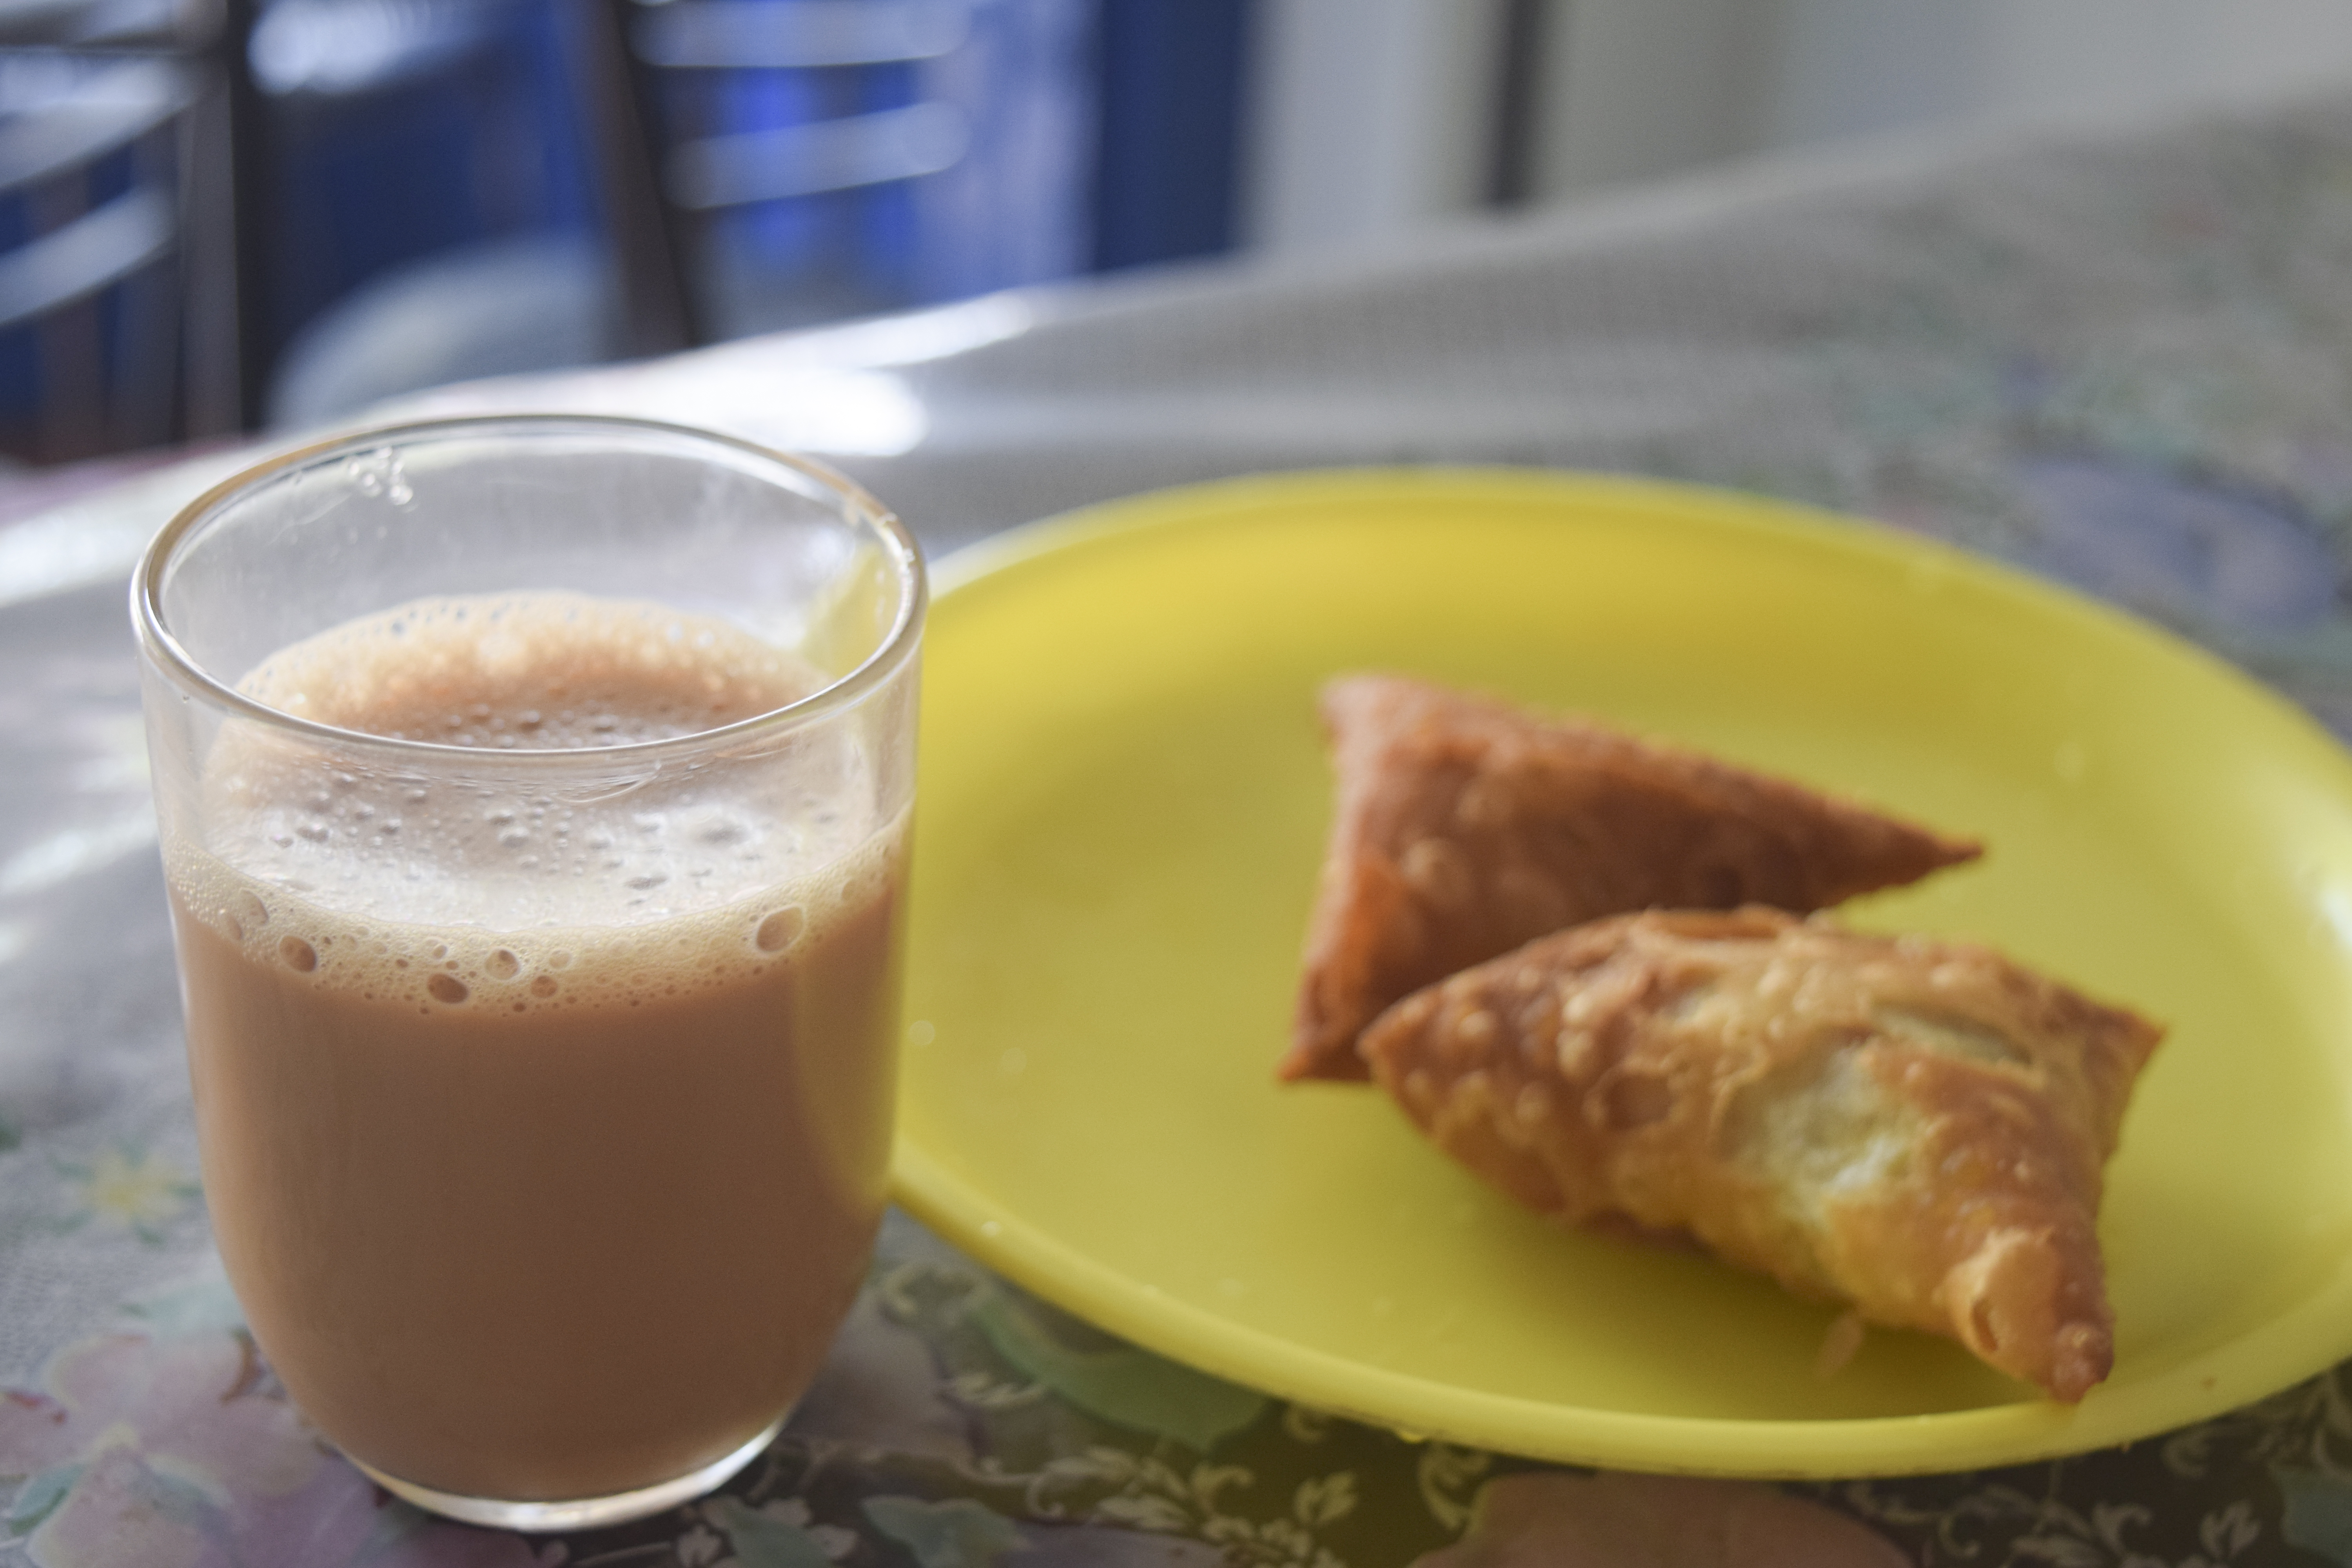 This image show Chai and vegetarian samosa, in India, a stable food for Mischa Moselle. [07DECEMBER2015 LIFE]